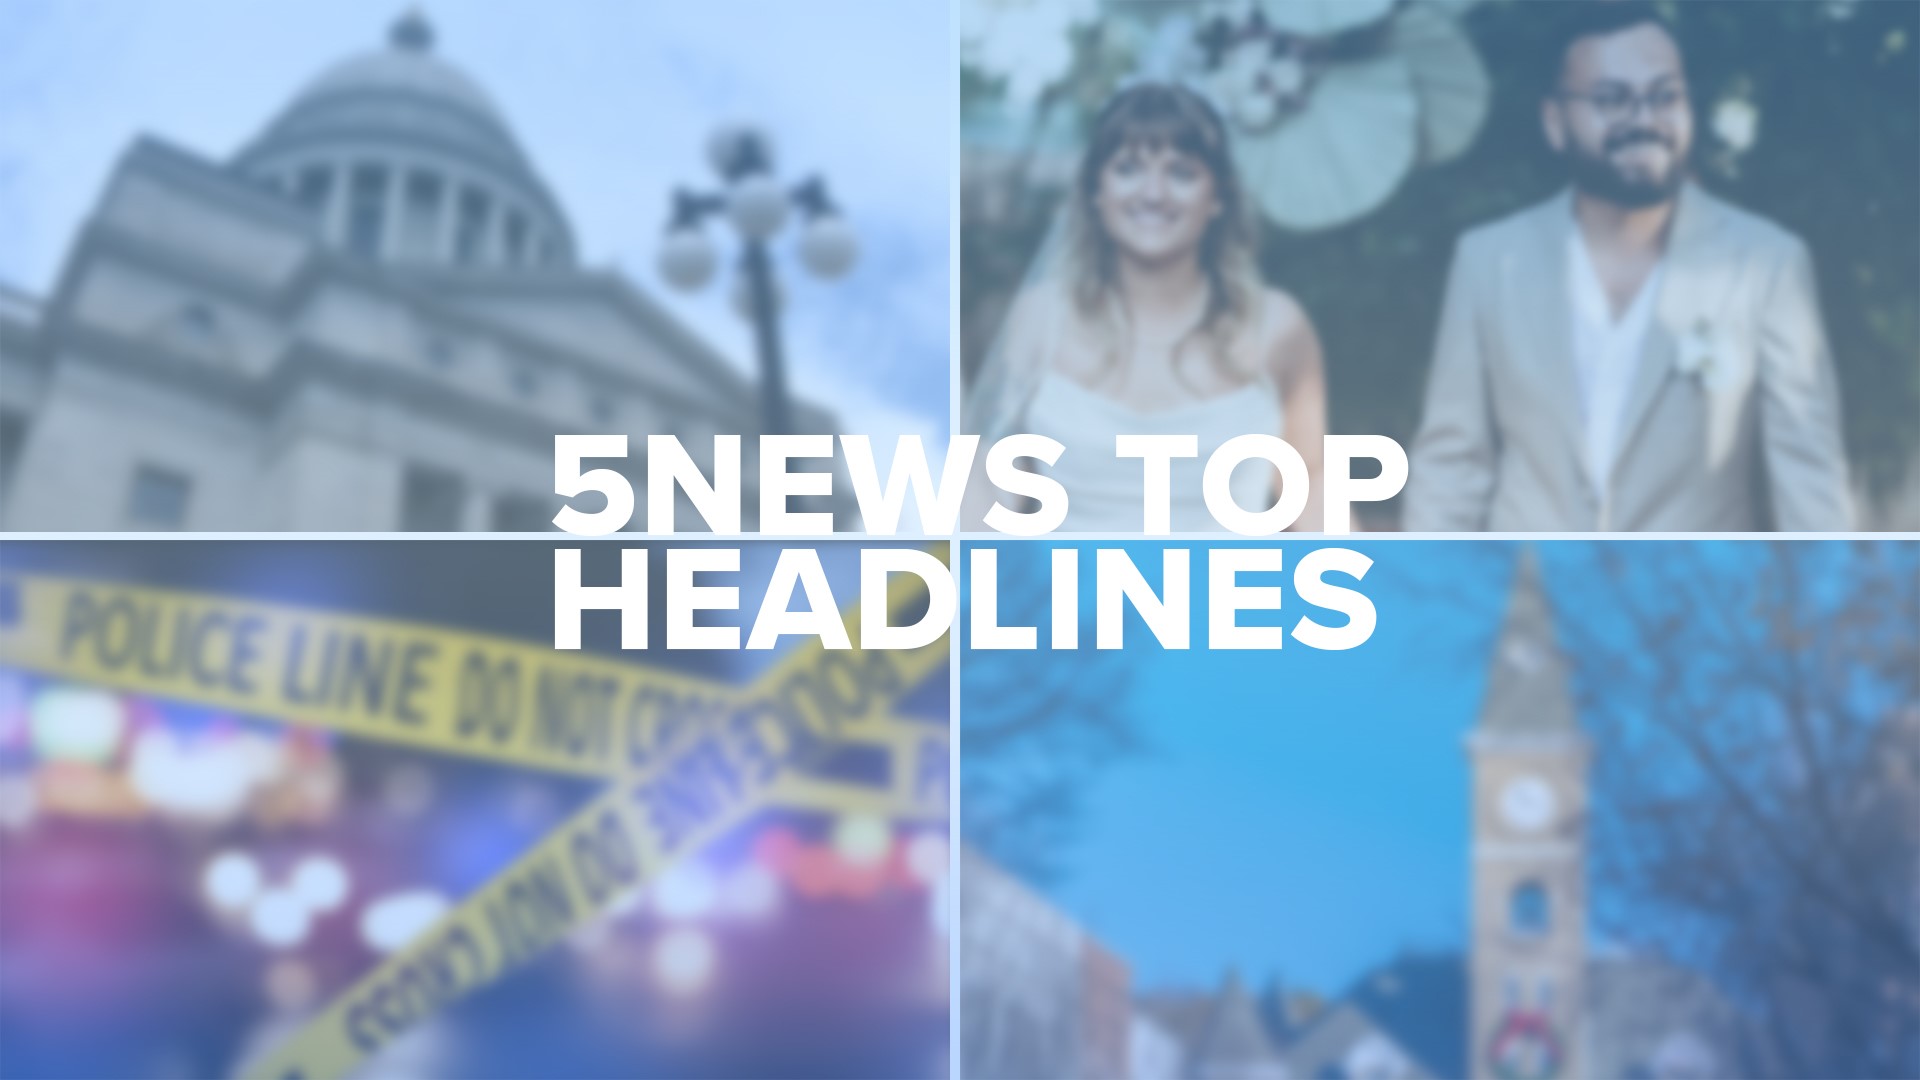 Check out today's headlines for local news across the area!